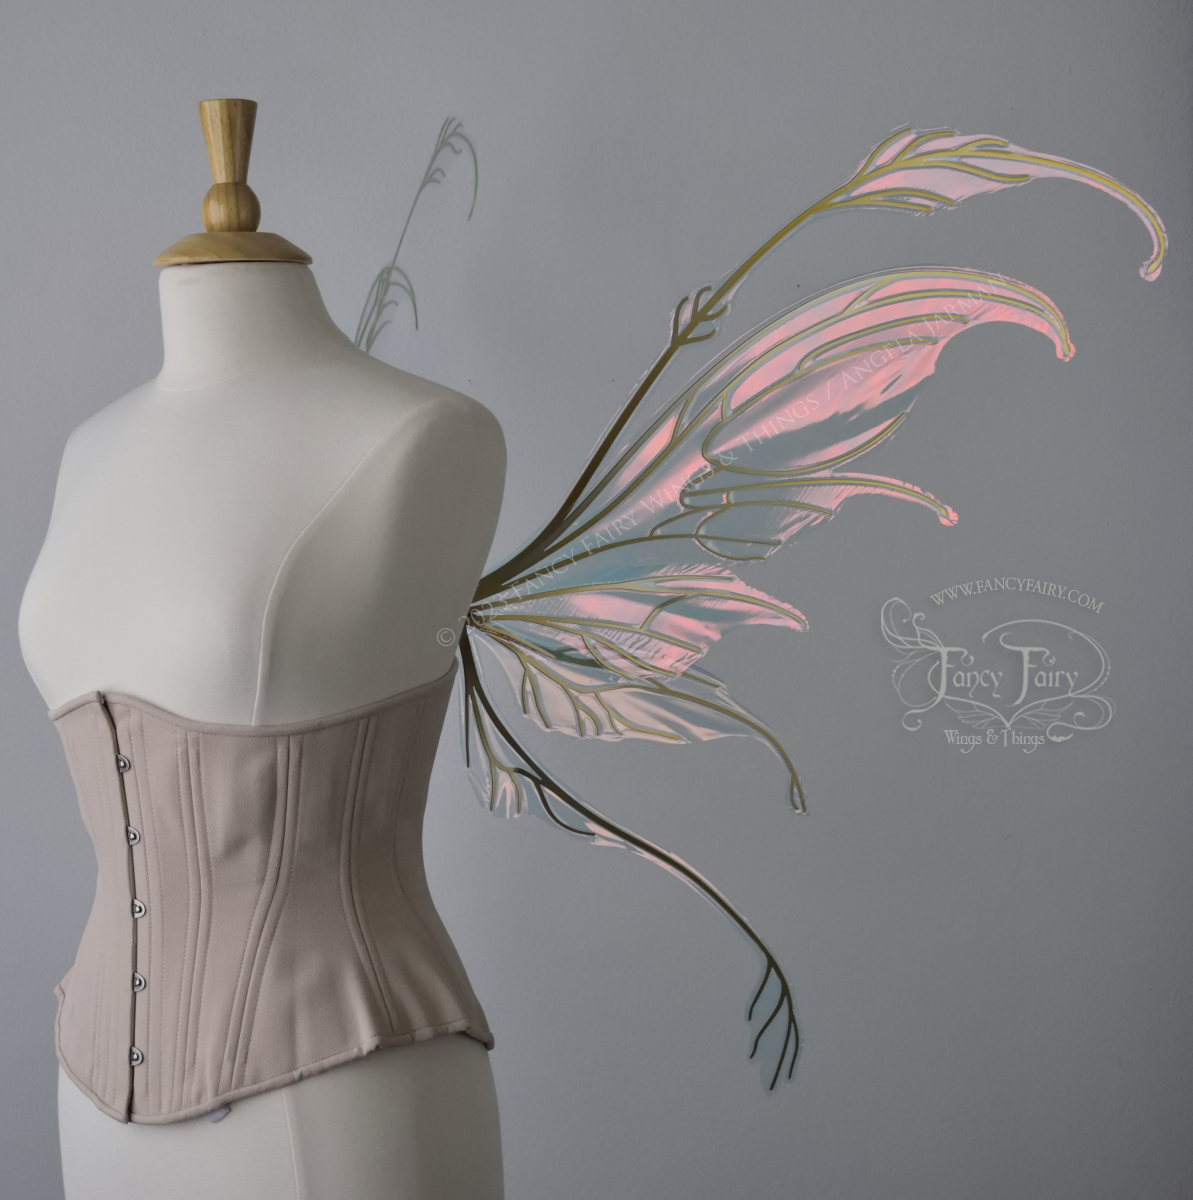 Right side view of an ivory dress form wearing an underbust corset & 'Fauna' pinkish iridescent fairy wings with gold veining